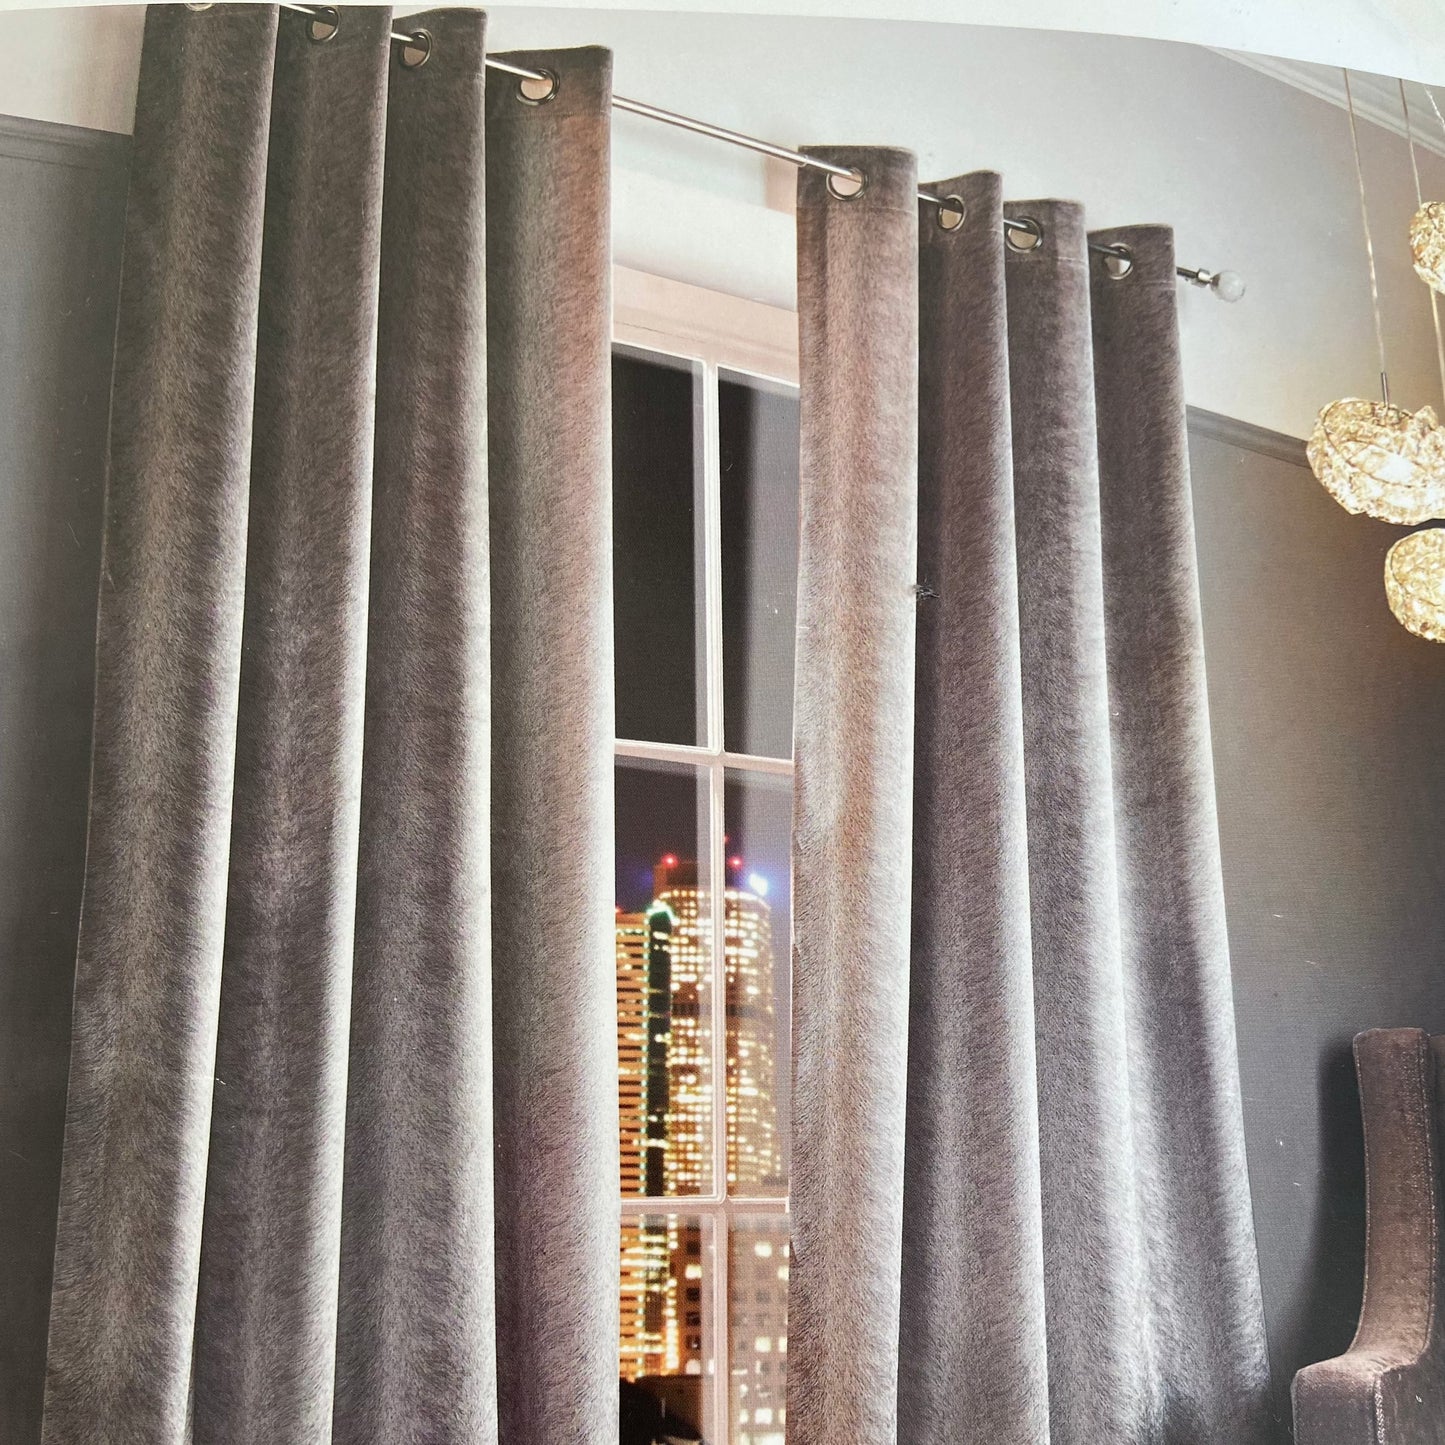 Adelphi Eyelet Curtains by Kylie Minogue at Home